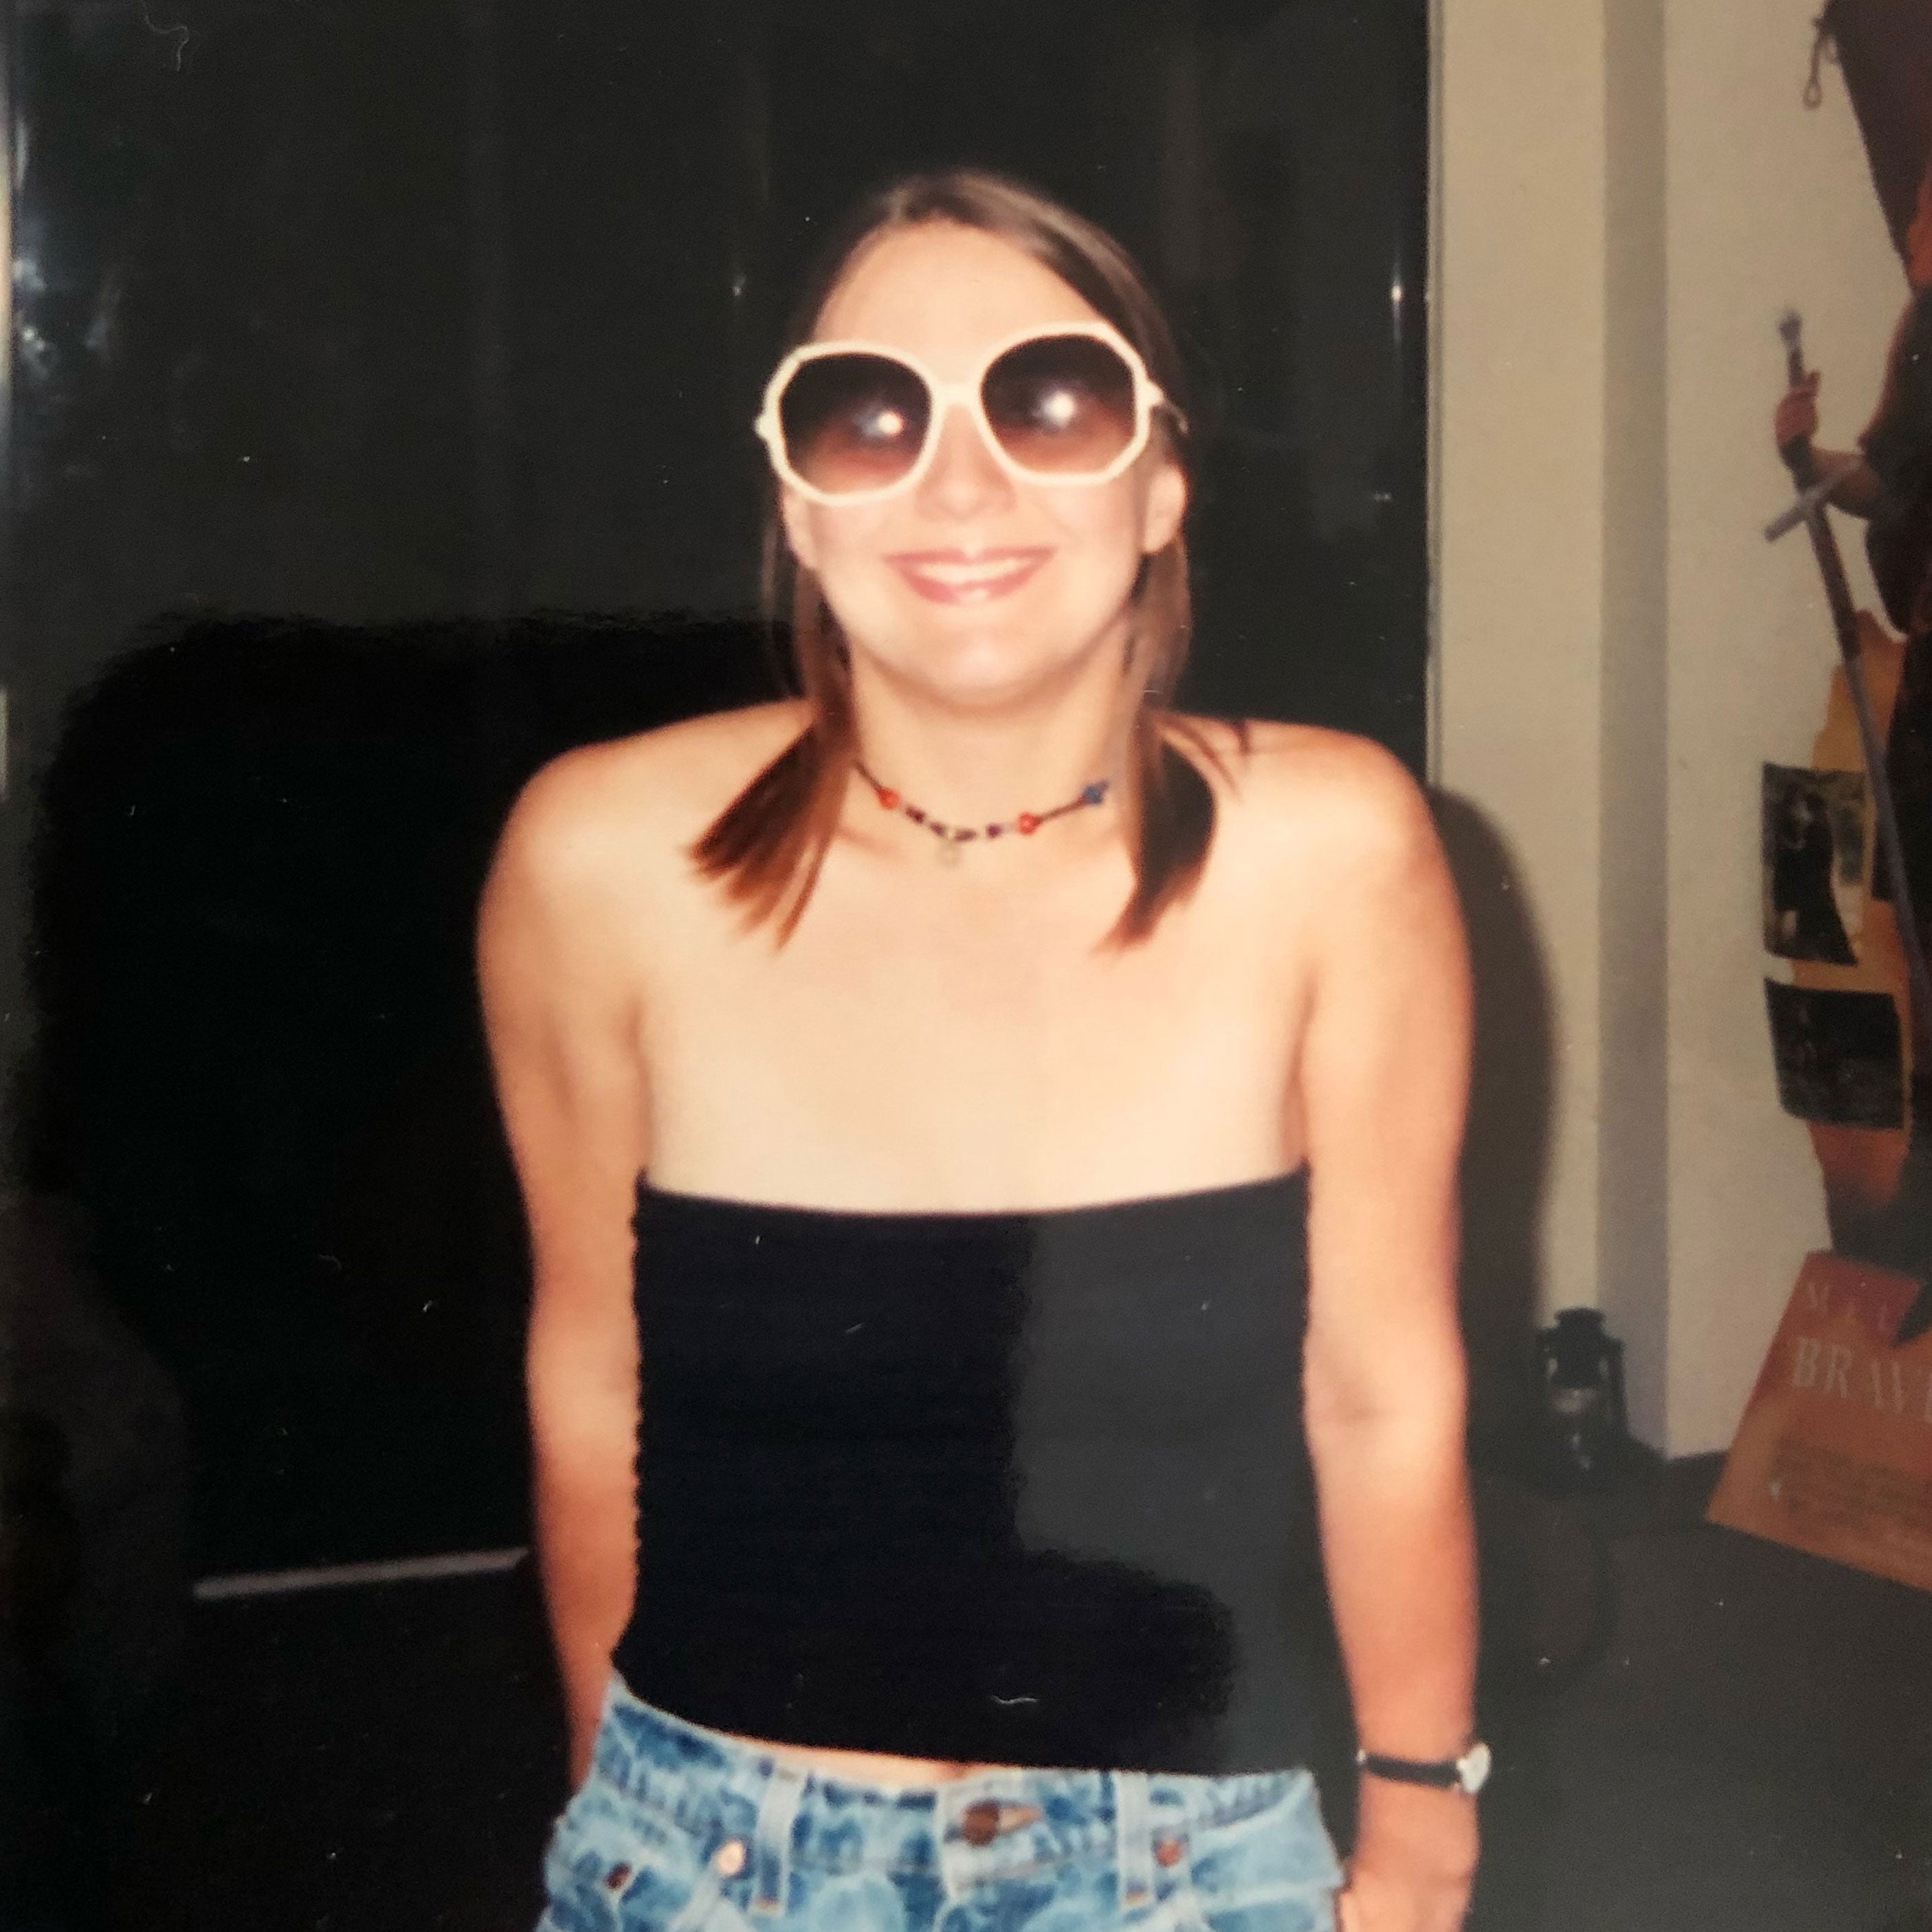 Eve Crawford Peyton at age 22, wearing sunglasses and a necklace.